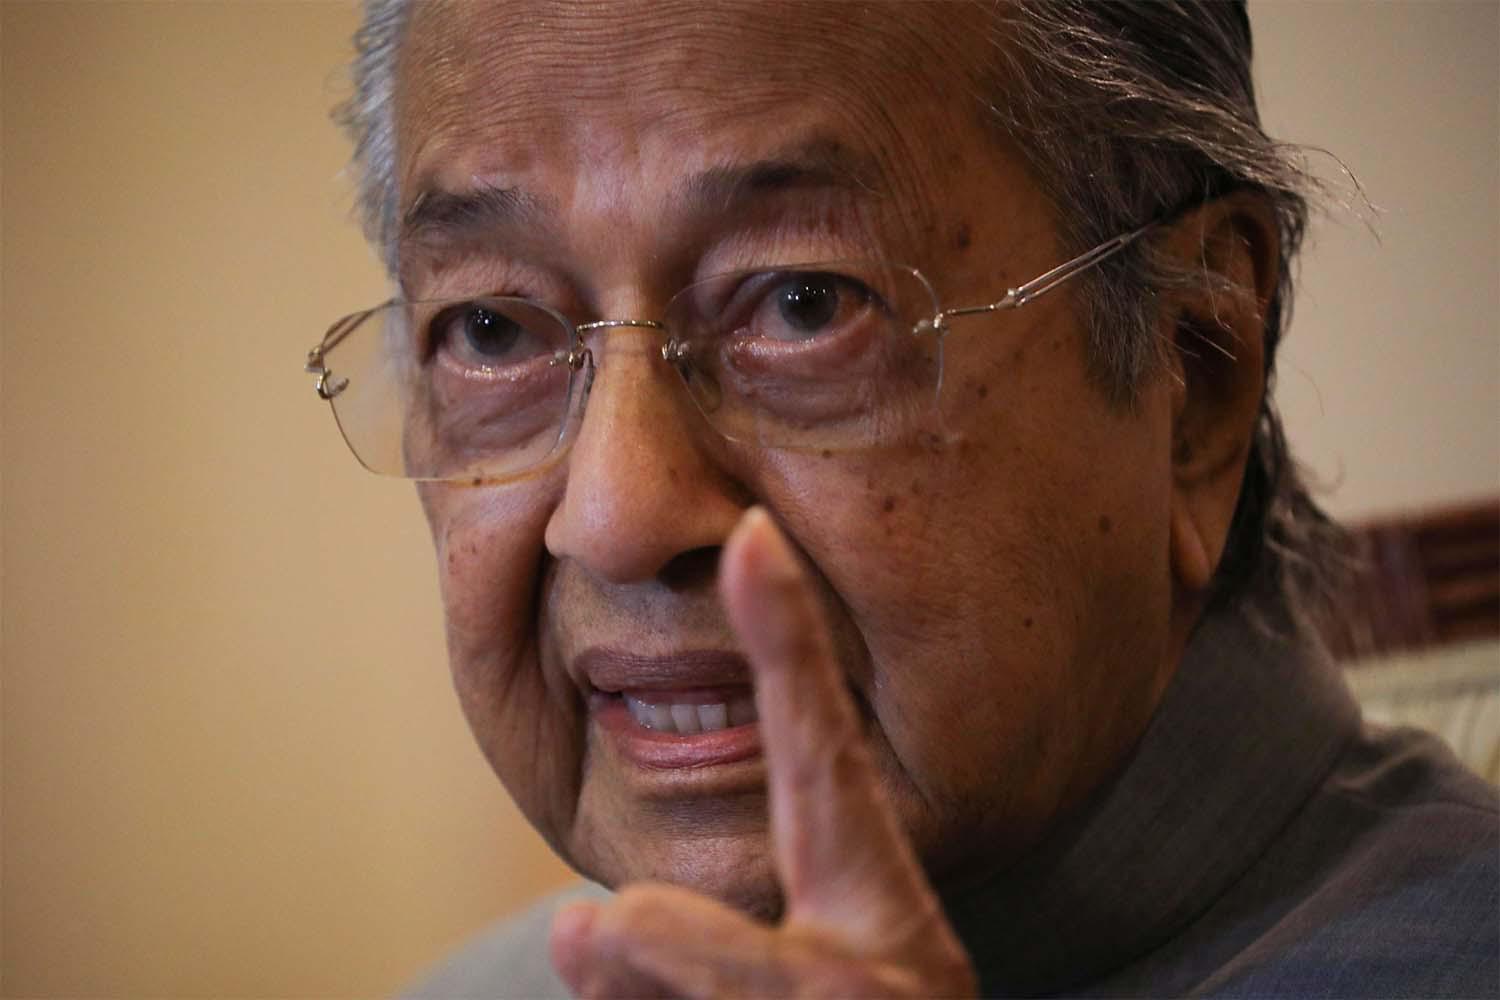 Twitter said Mahathir's message violated its rules and it had removed the tweet